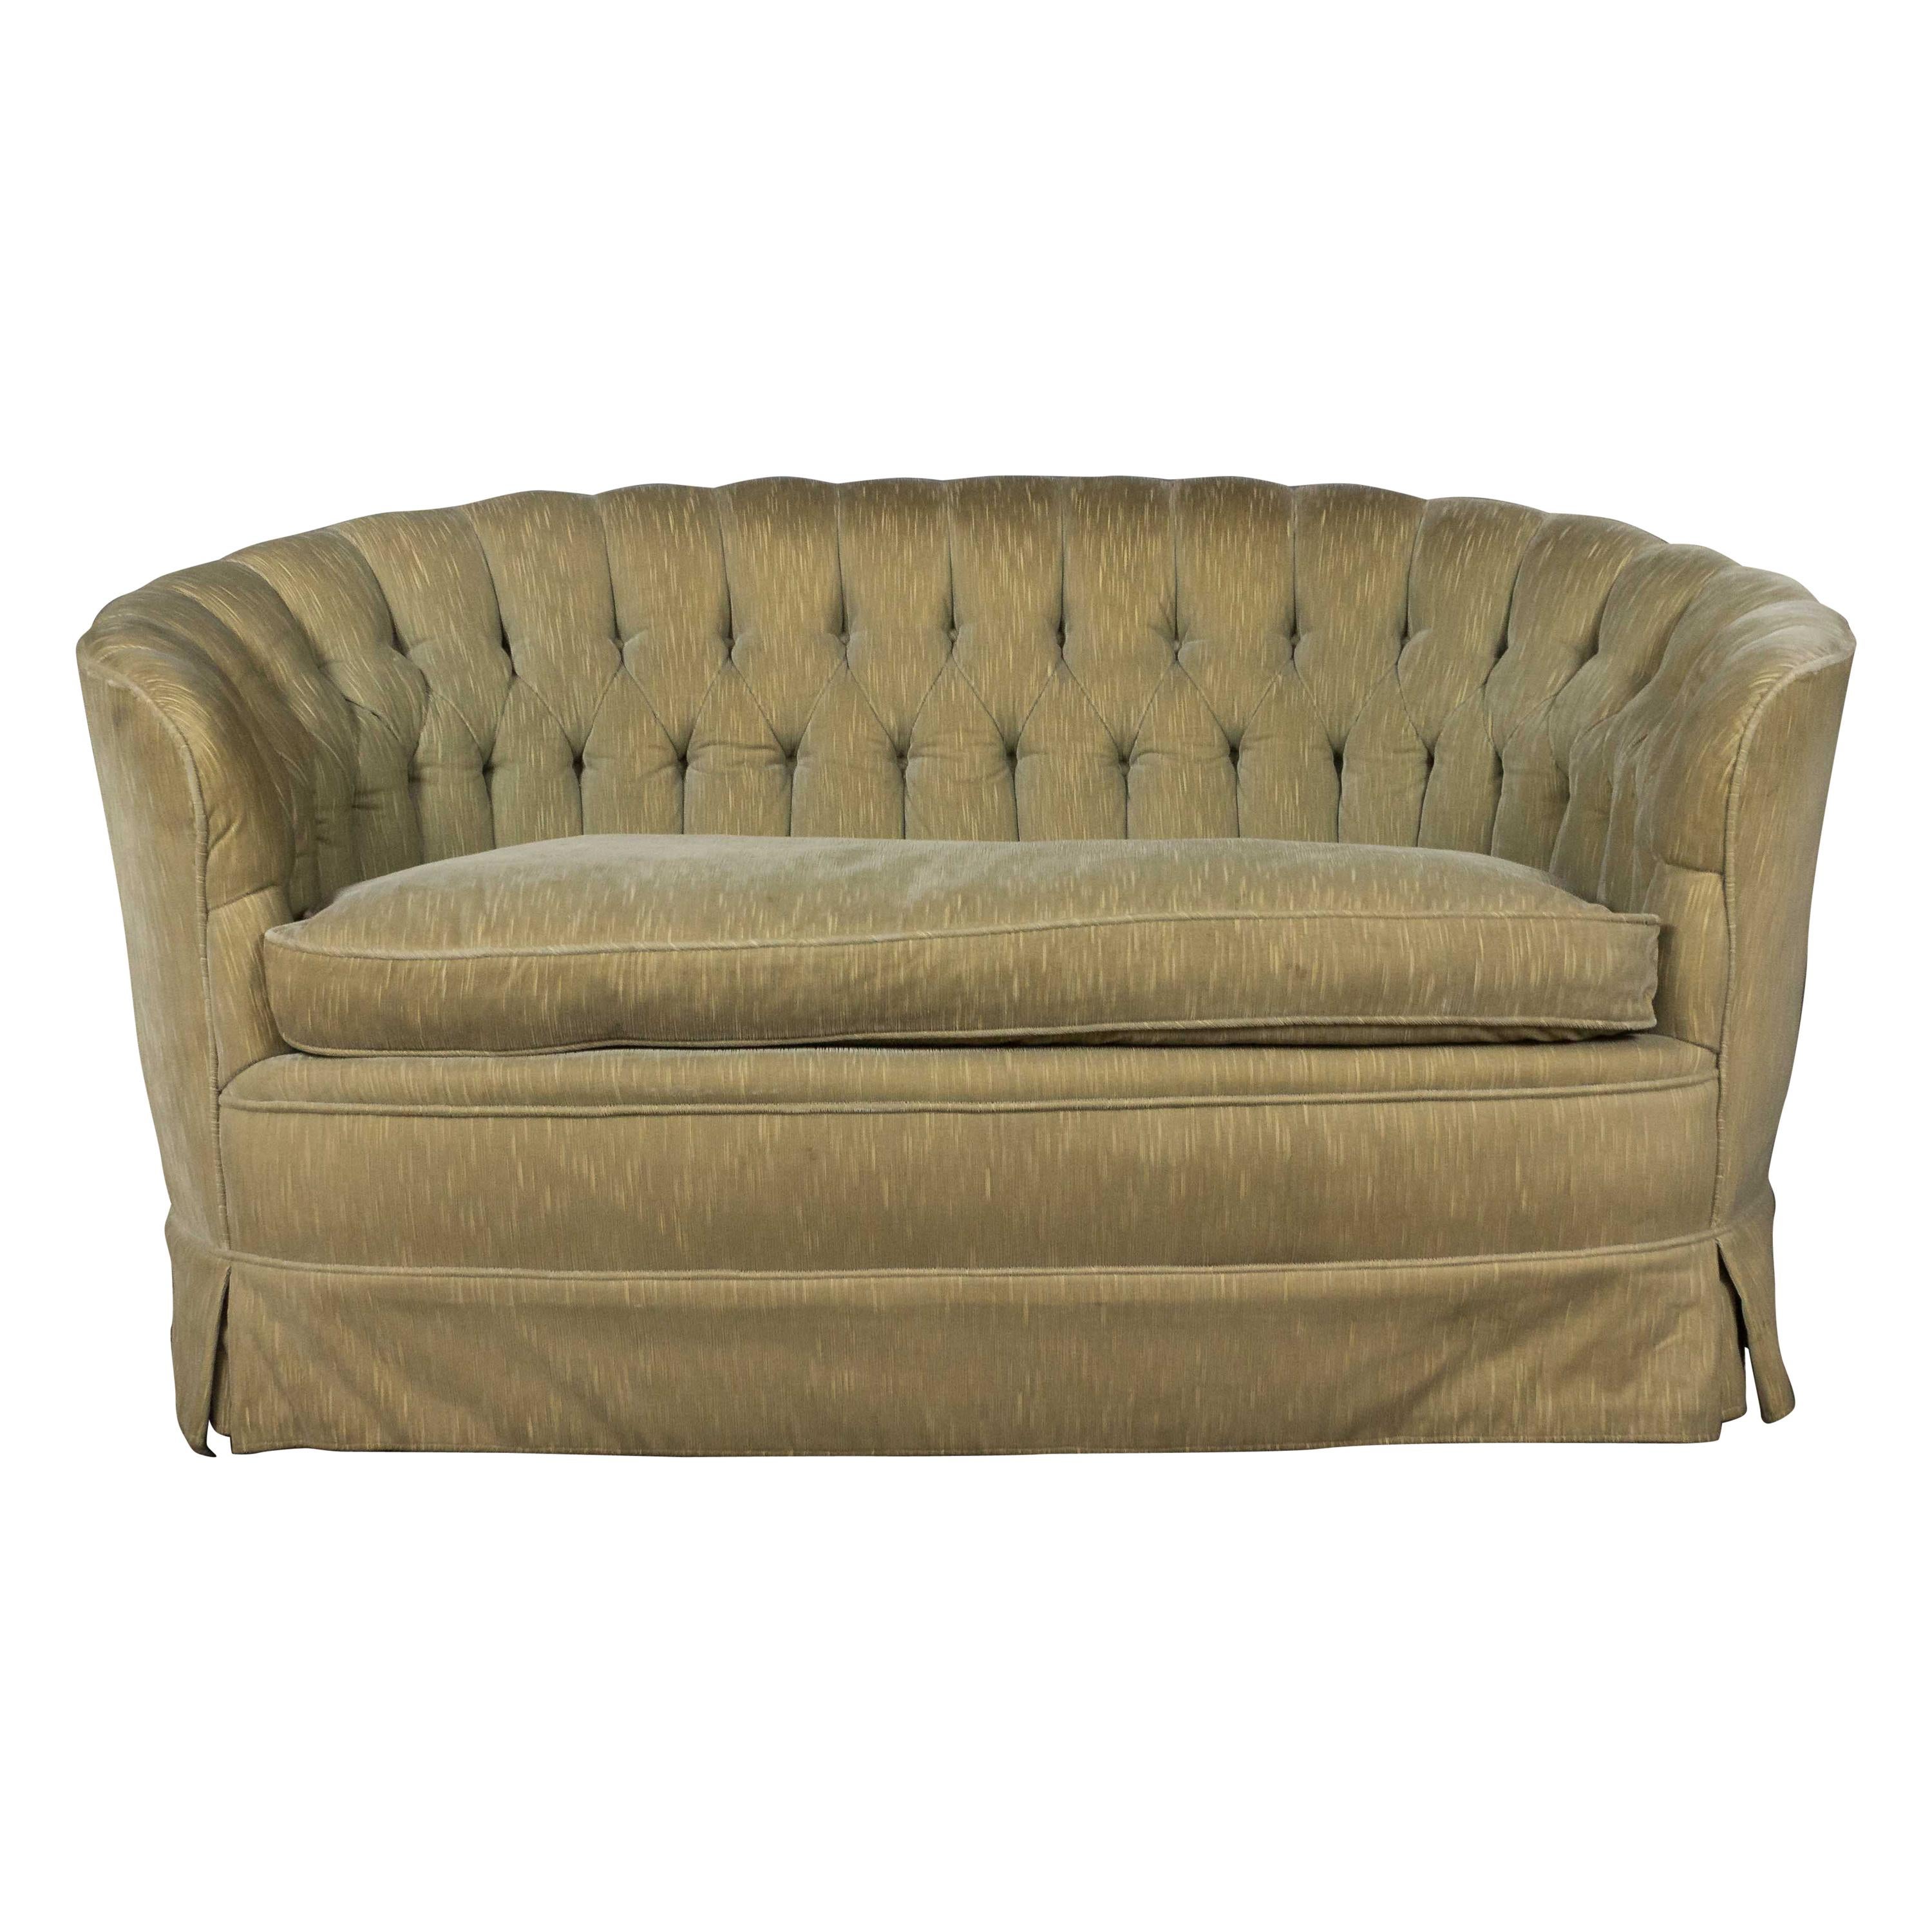 Small Mid Century Tufted Sofa with Loose Seat Cushion